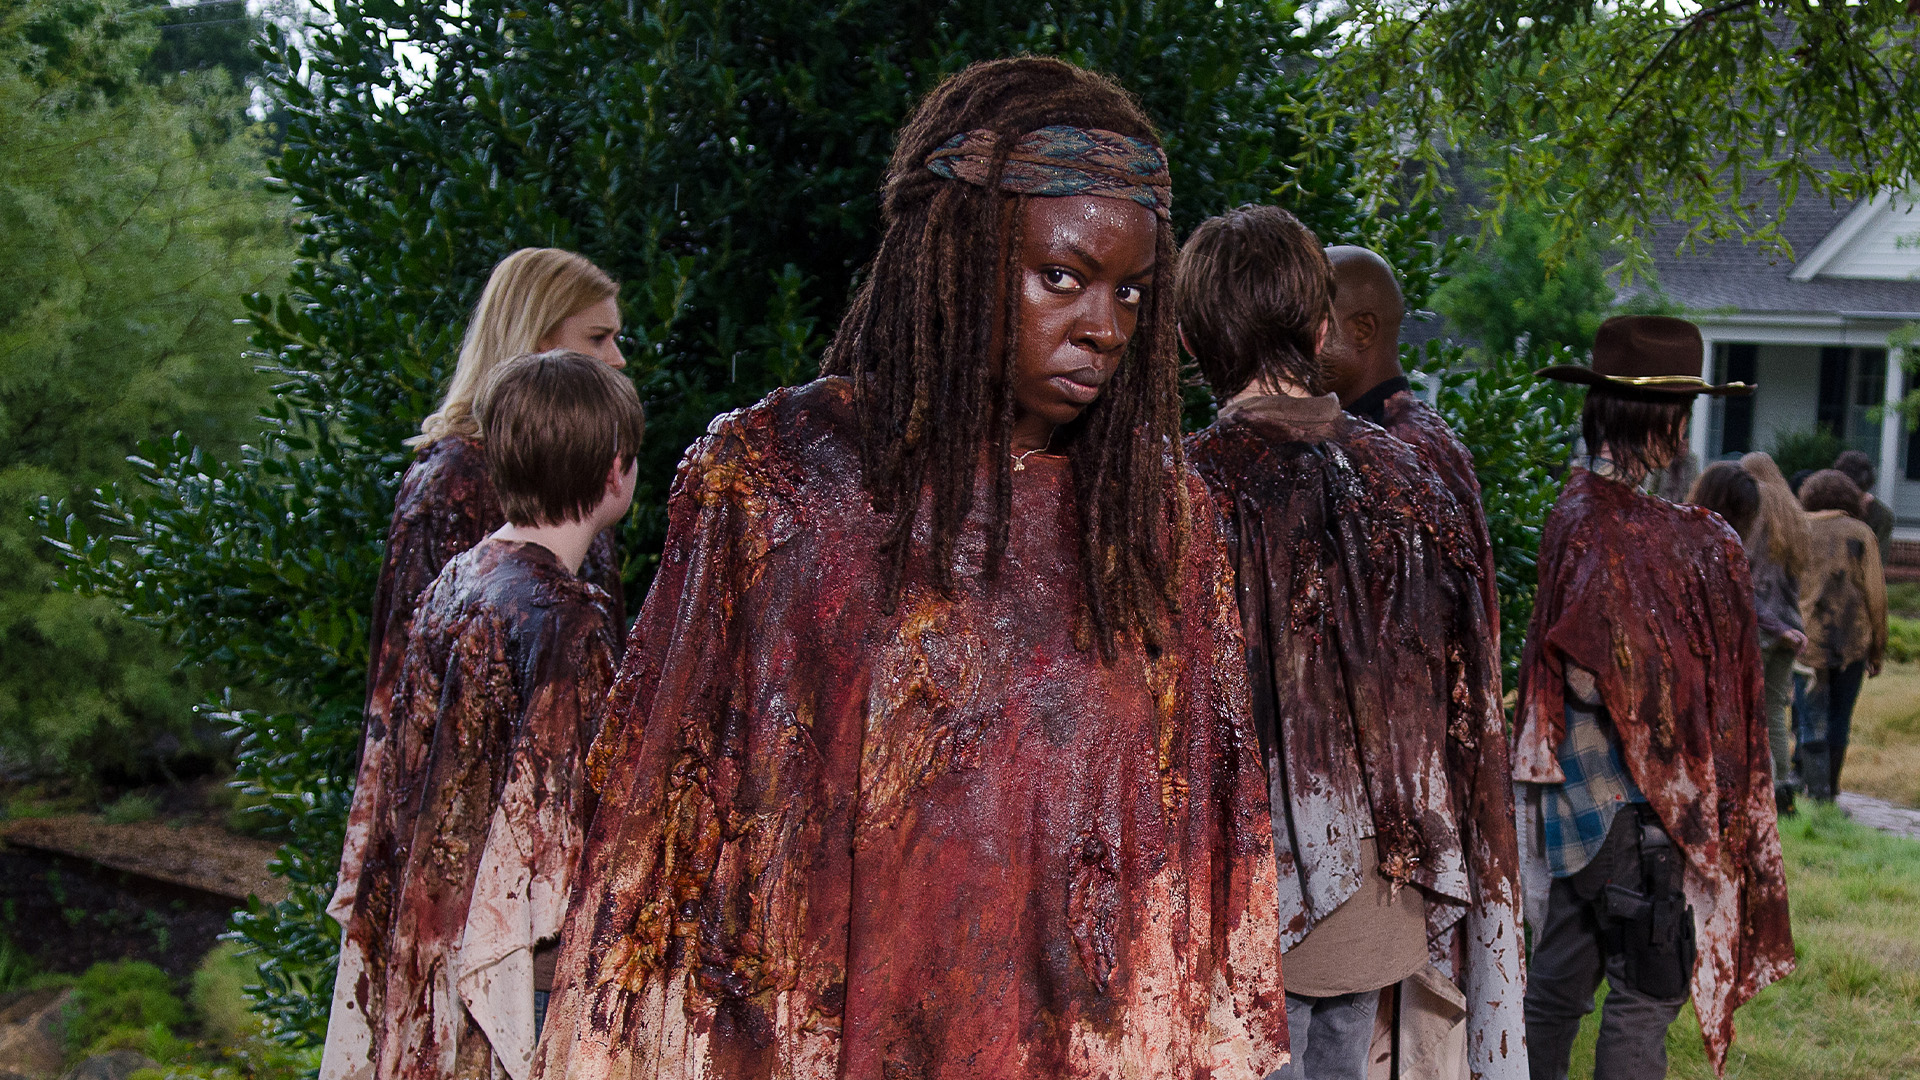 No Way Out: Best of Michonne Edition, Relive Michonne's best moments in this iconic episode from Season 6., Season 1066703, Episode 3